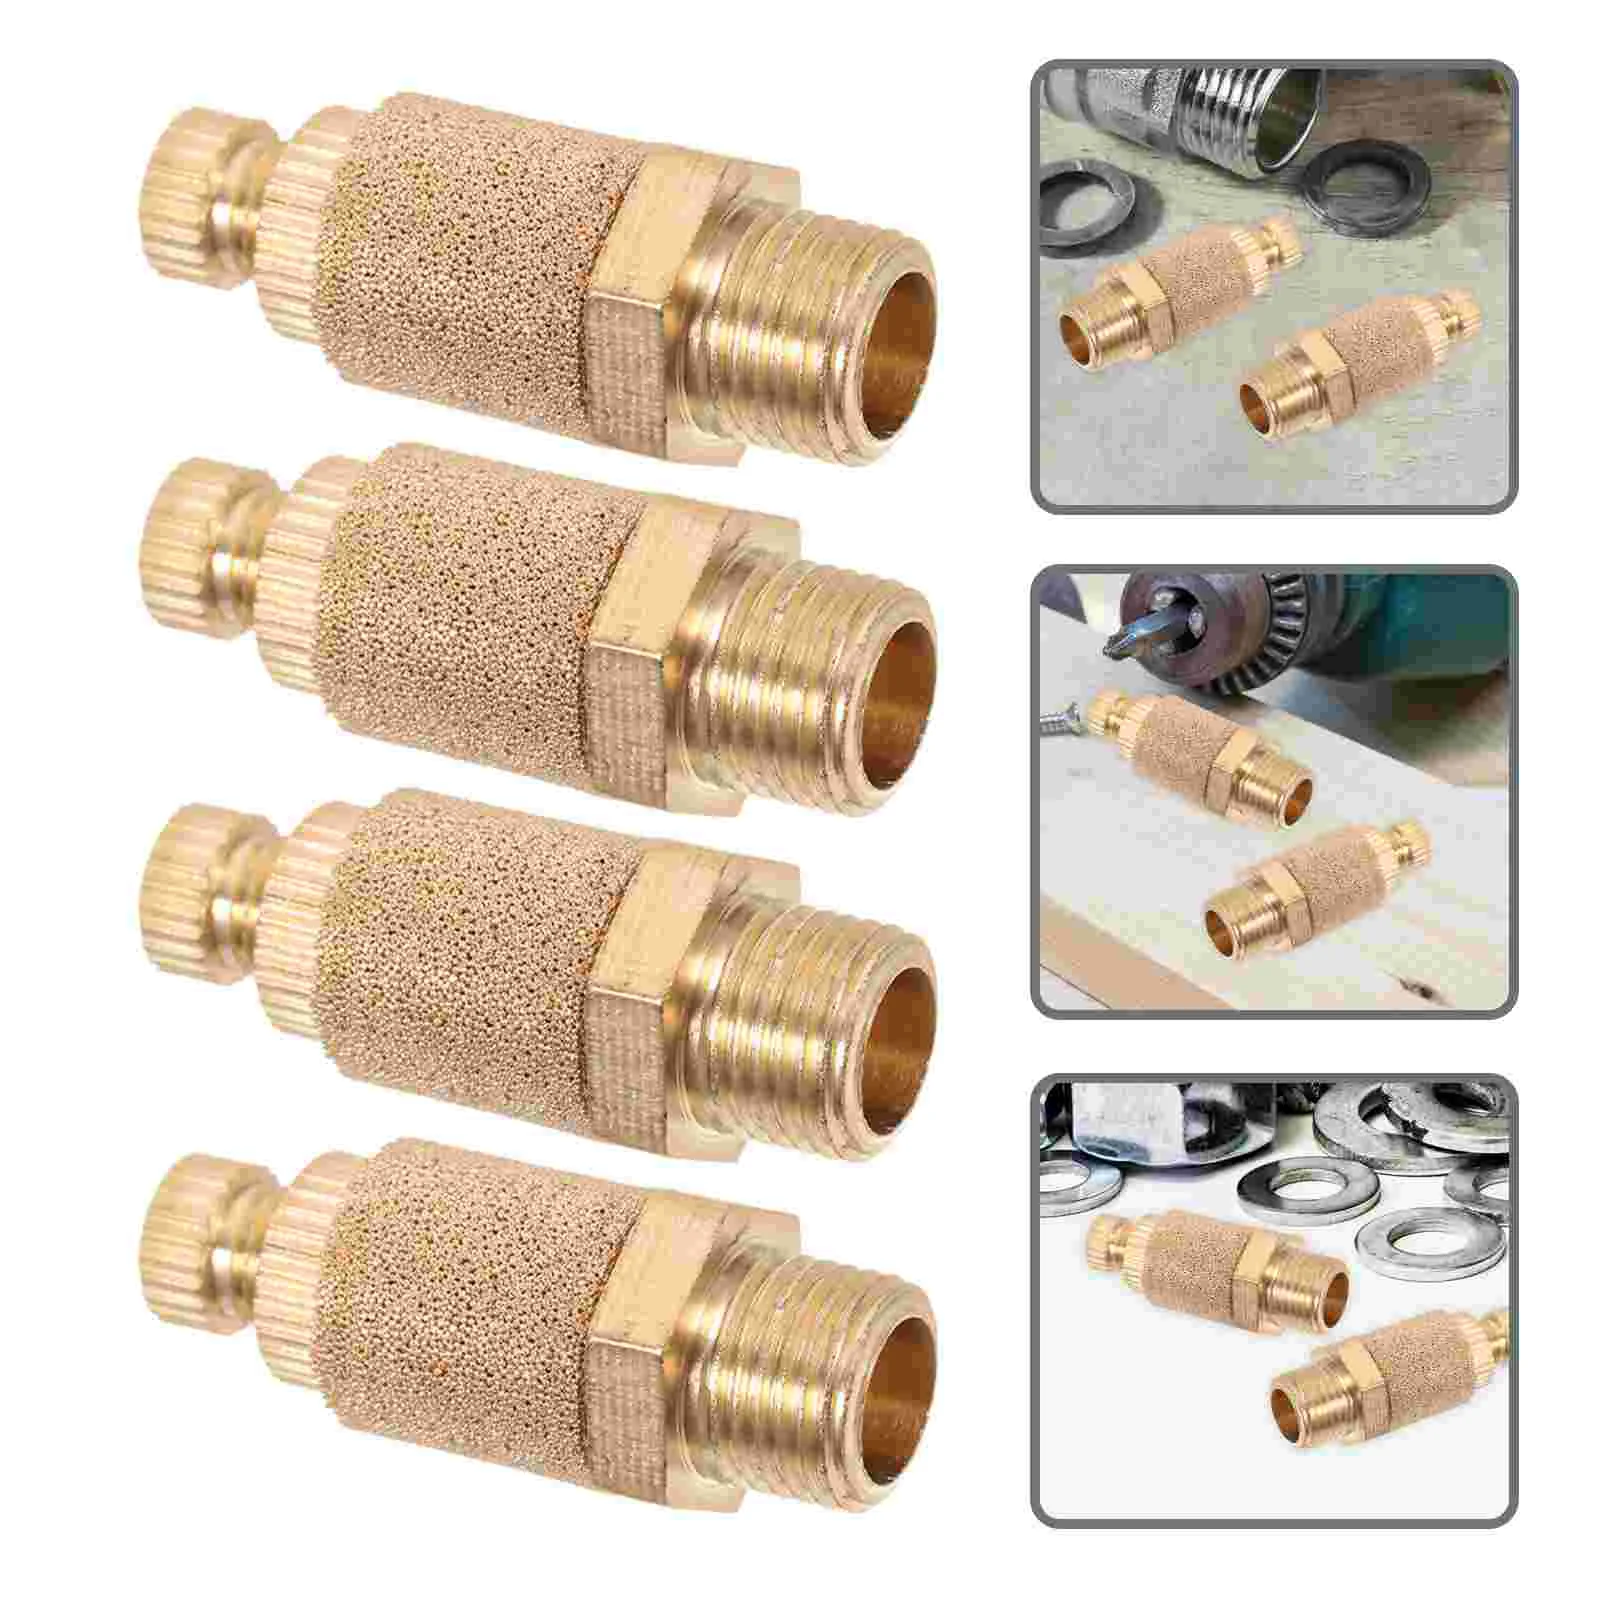 

8 Pcs Exhaust Muffler Noise Reduction Pneumatic Mufflers Air Silencer Thread Compressor Compressed 1/8 Copper